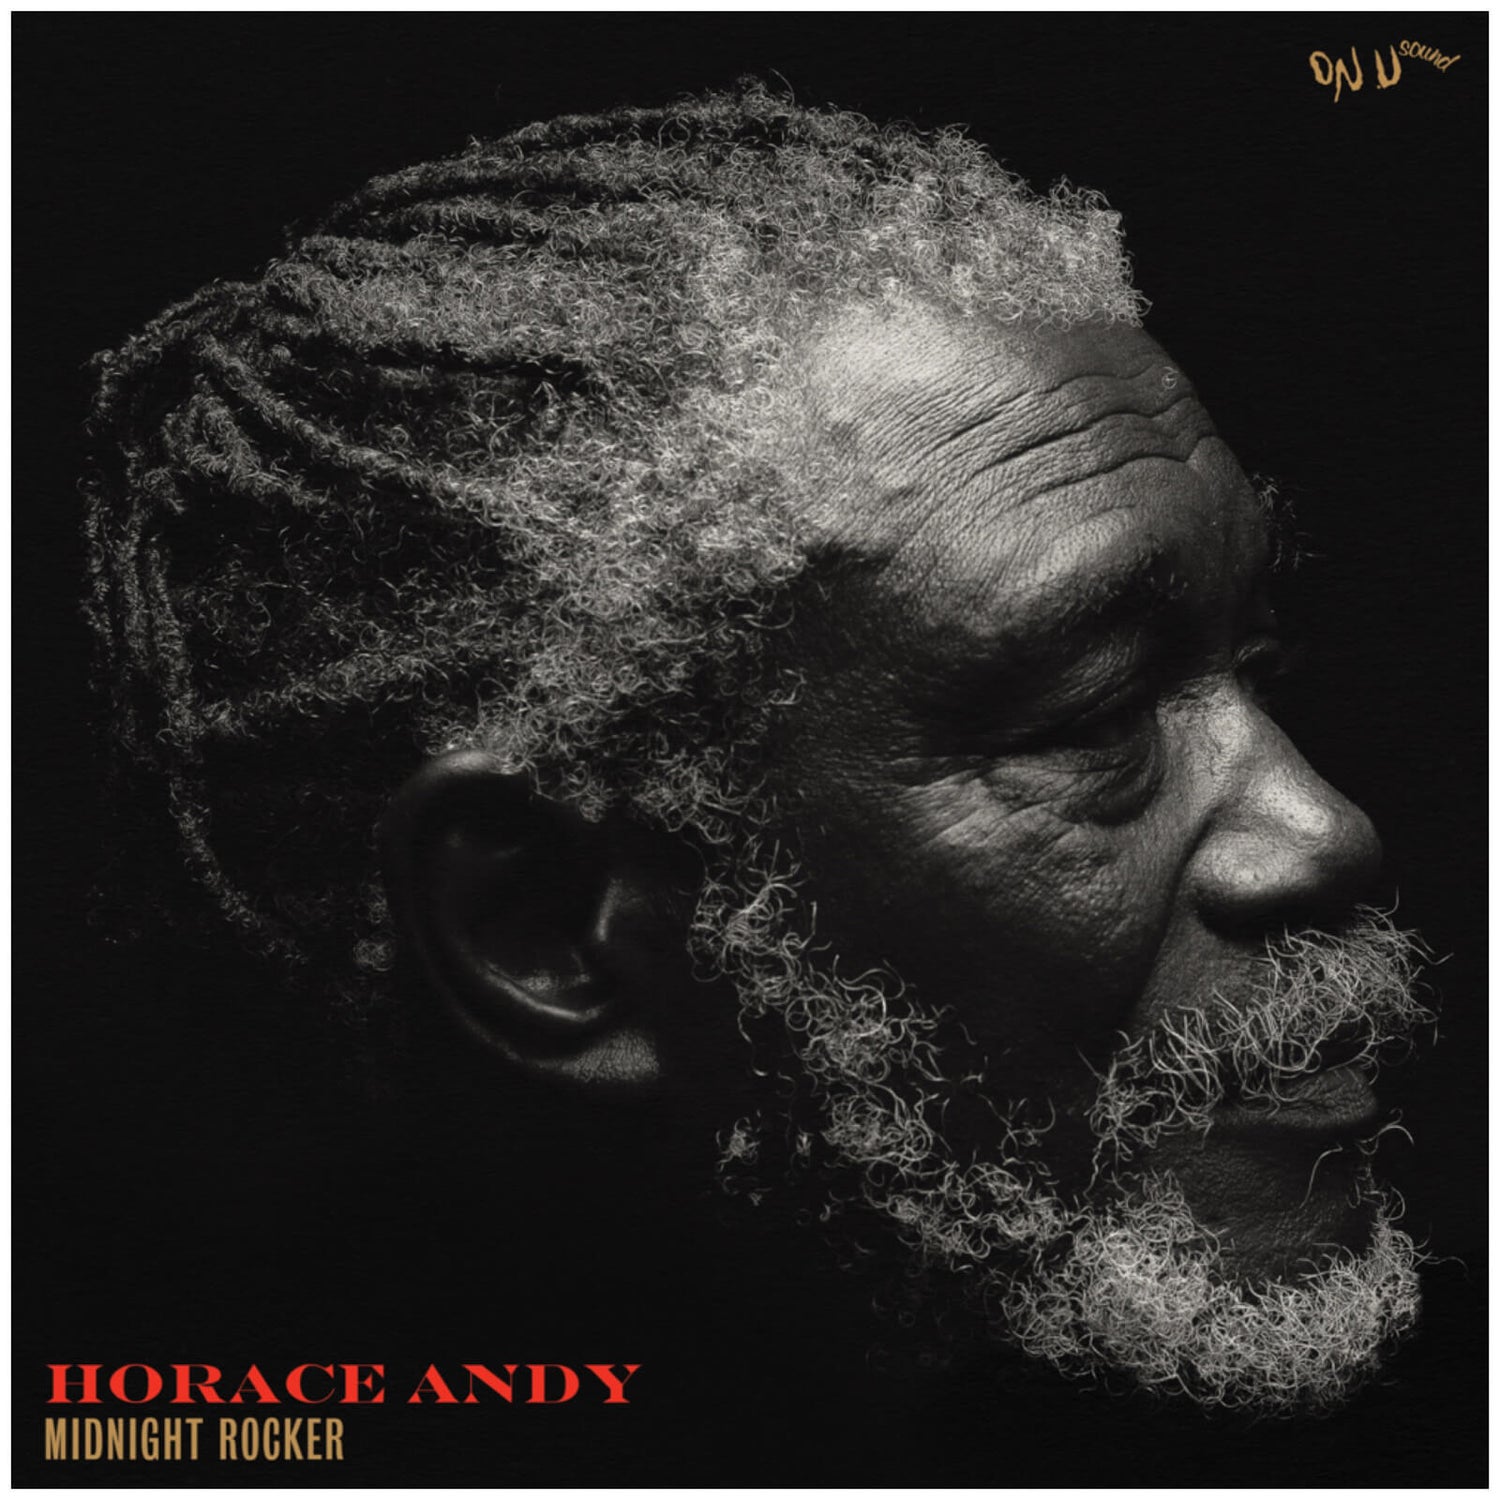 Horace Andy - Midnight Rocker Vinyl 2LP (Clear Red)